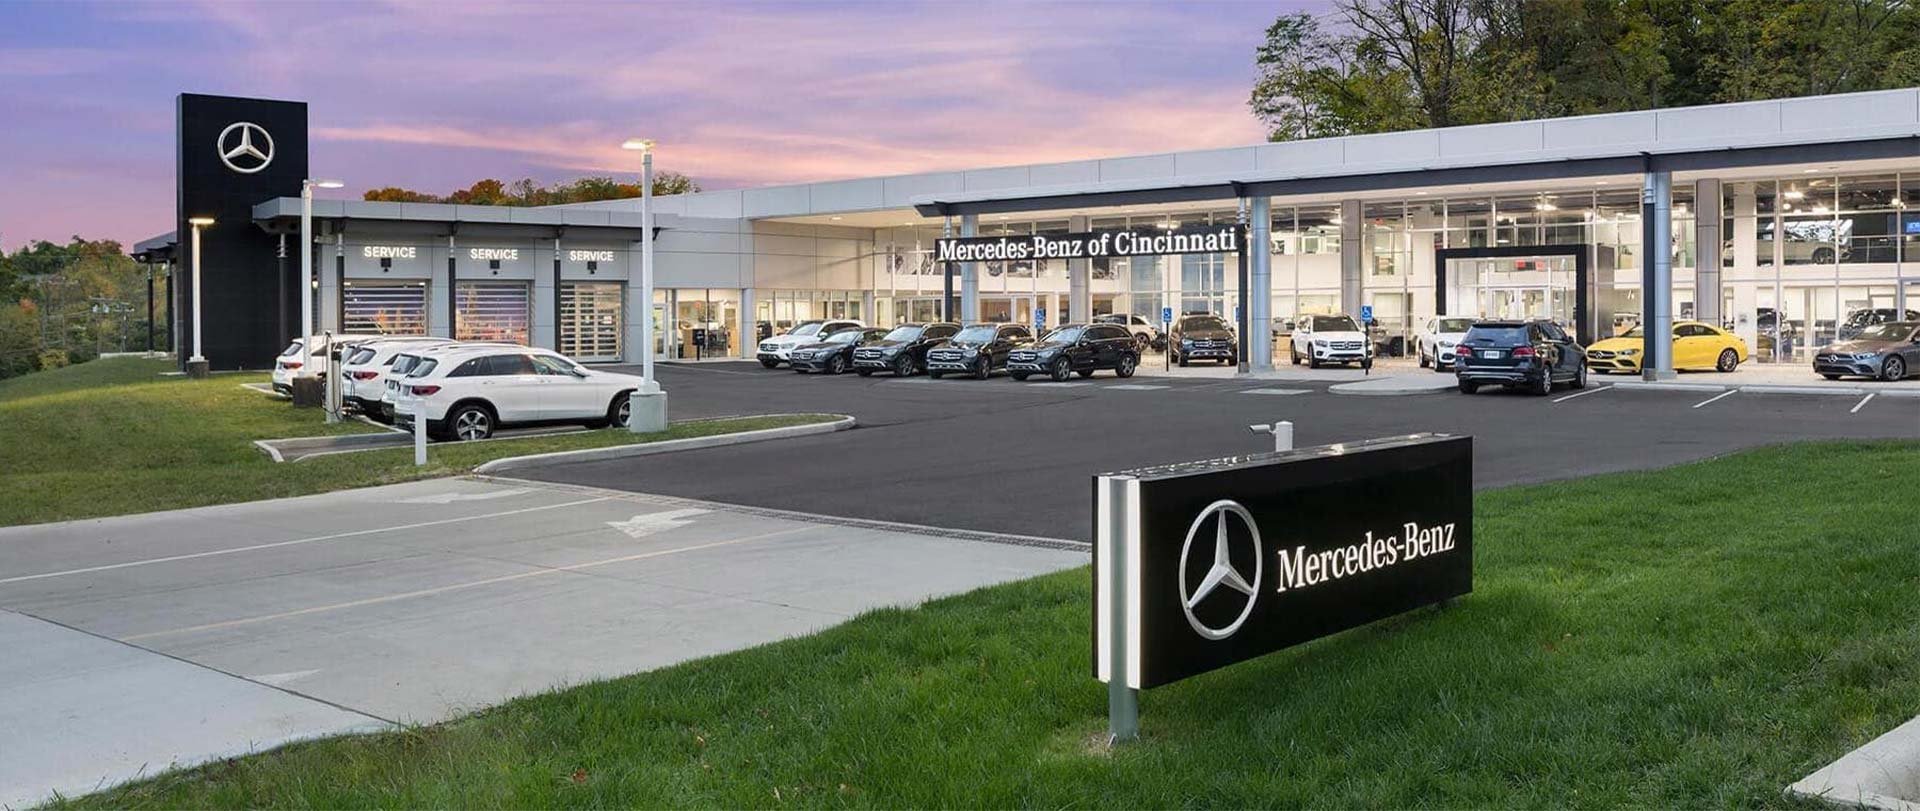 Photograph of the front of the Mercedes-Benz of Cincinnati dealership and lot.